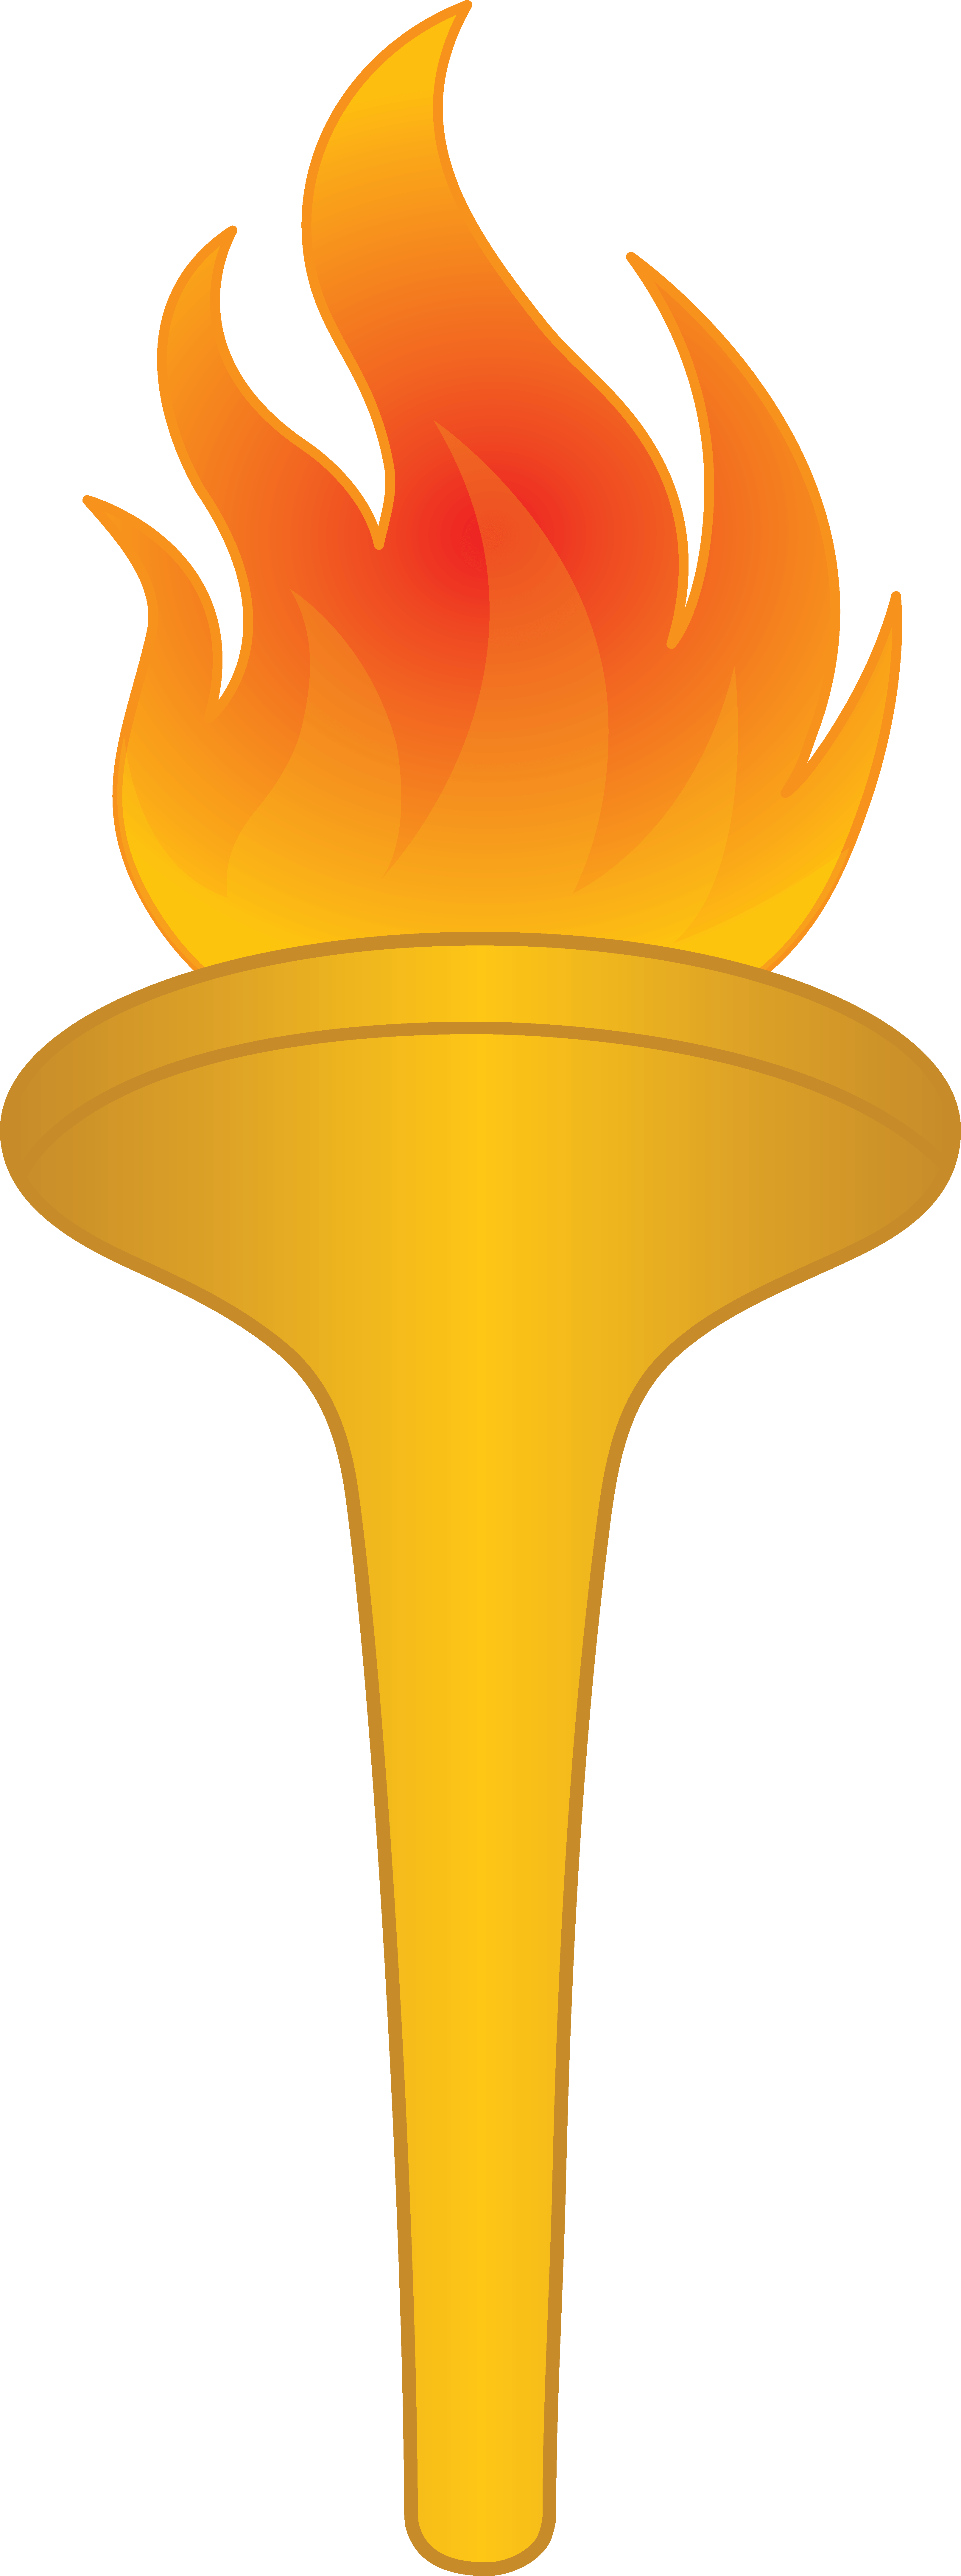 Animated Torch Cliparts